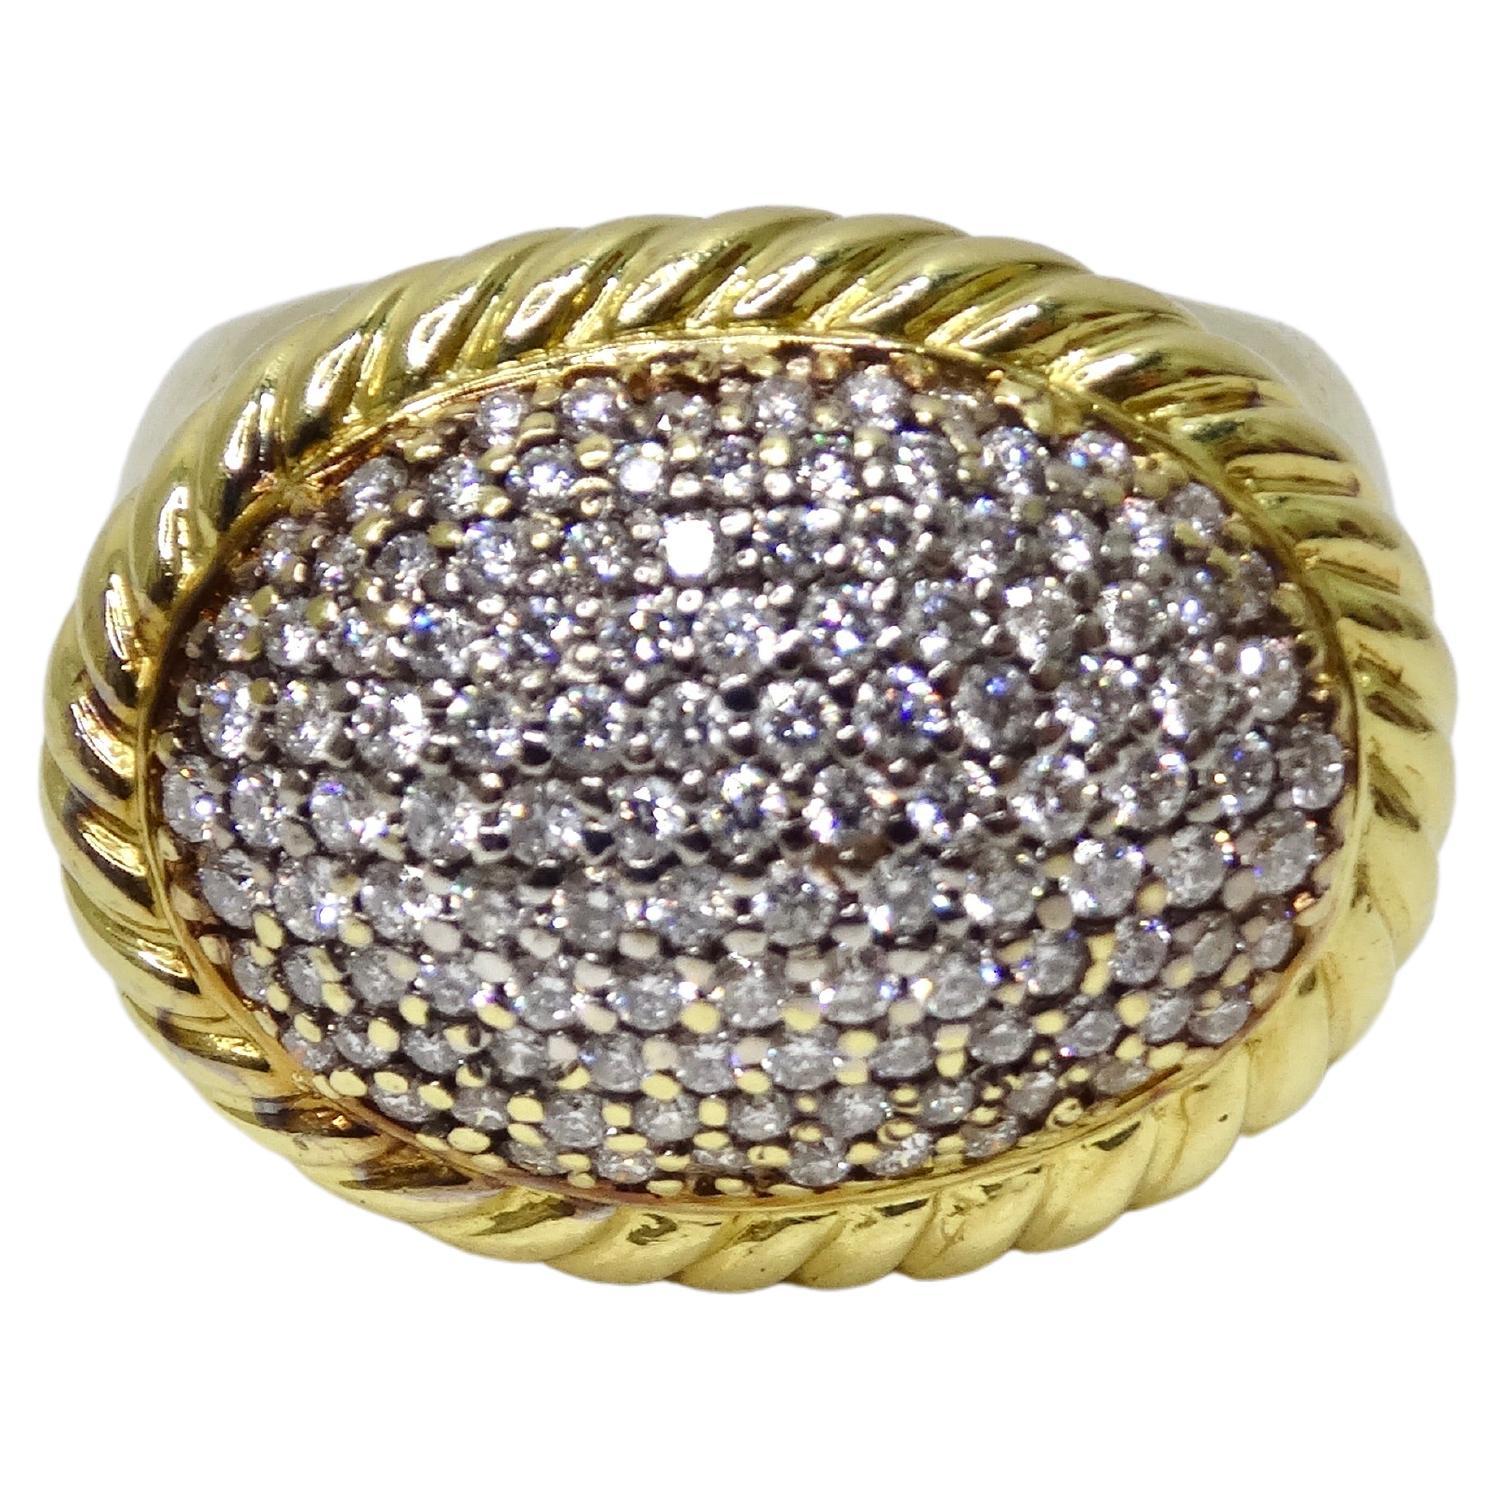 A David Yurman gem! Add this to your collection and you will be reaching for this everyday. It would pair beautifully with your day or night outfits making this a versatile find! It features an oval center completely encrusted in diamonds lined with